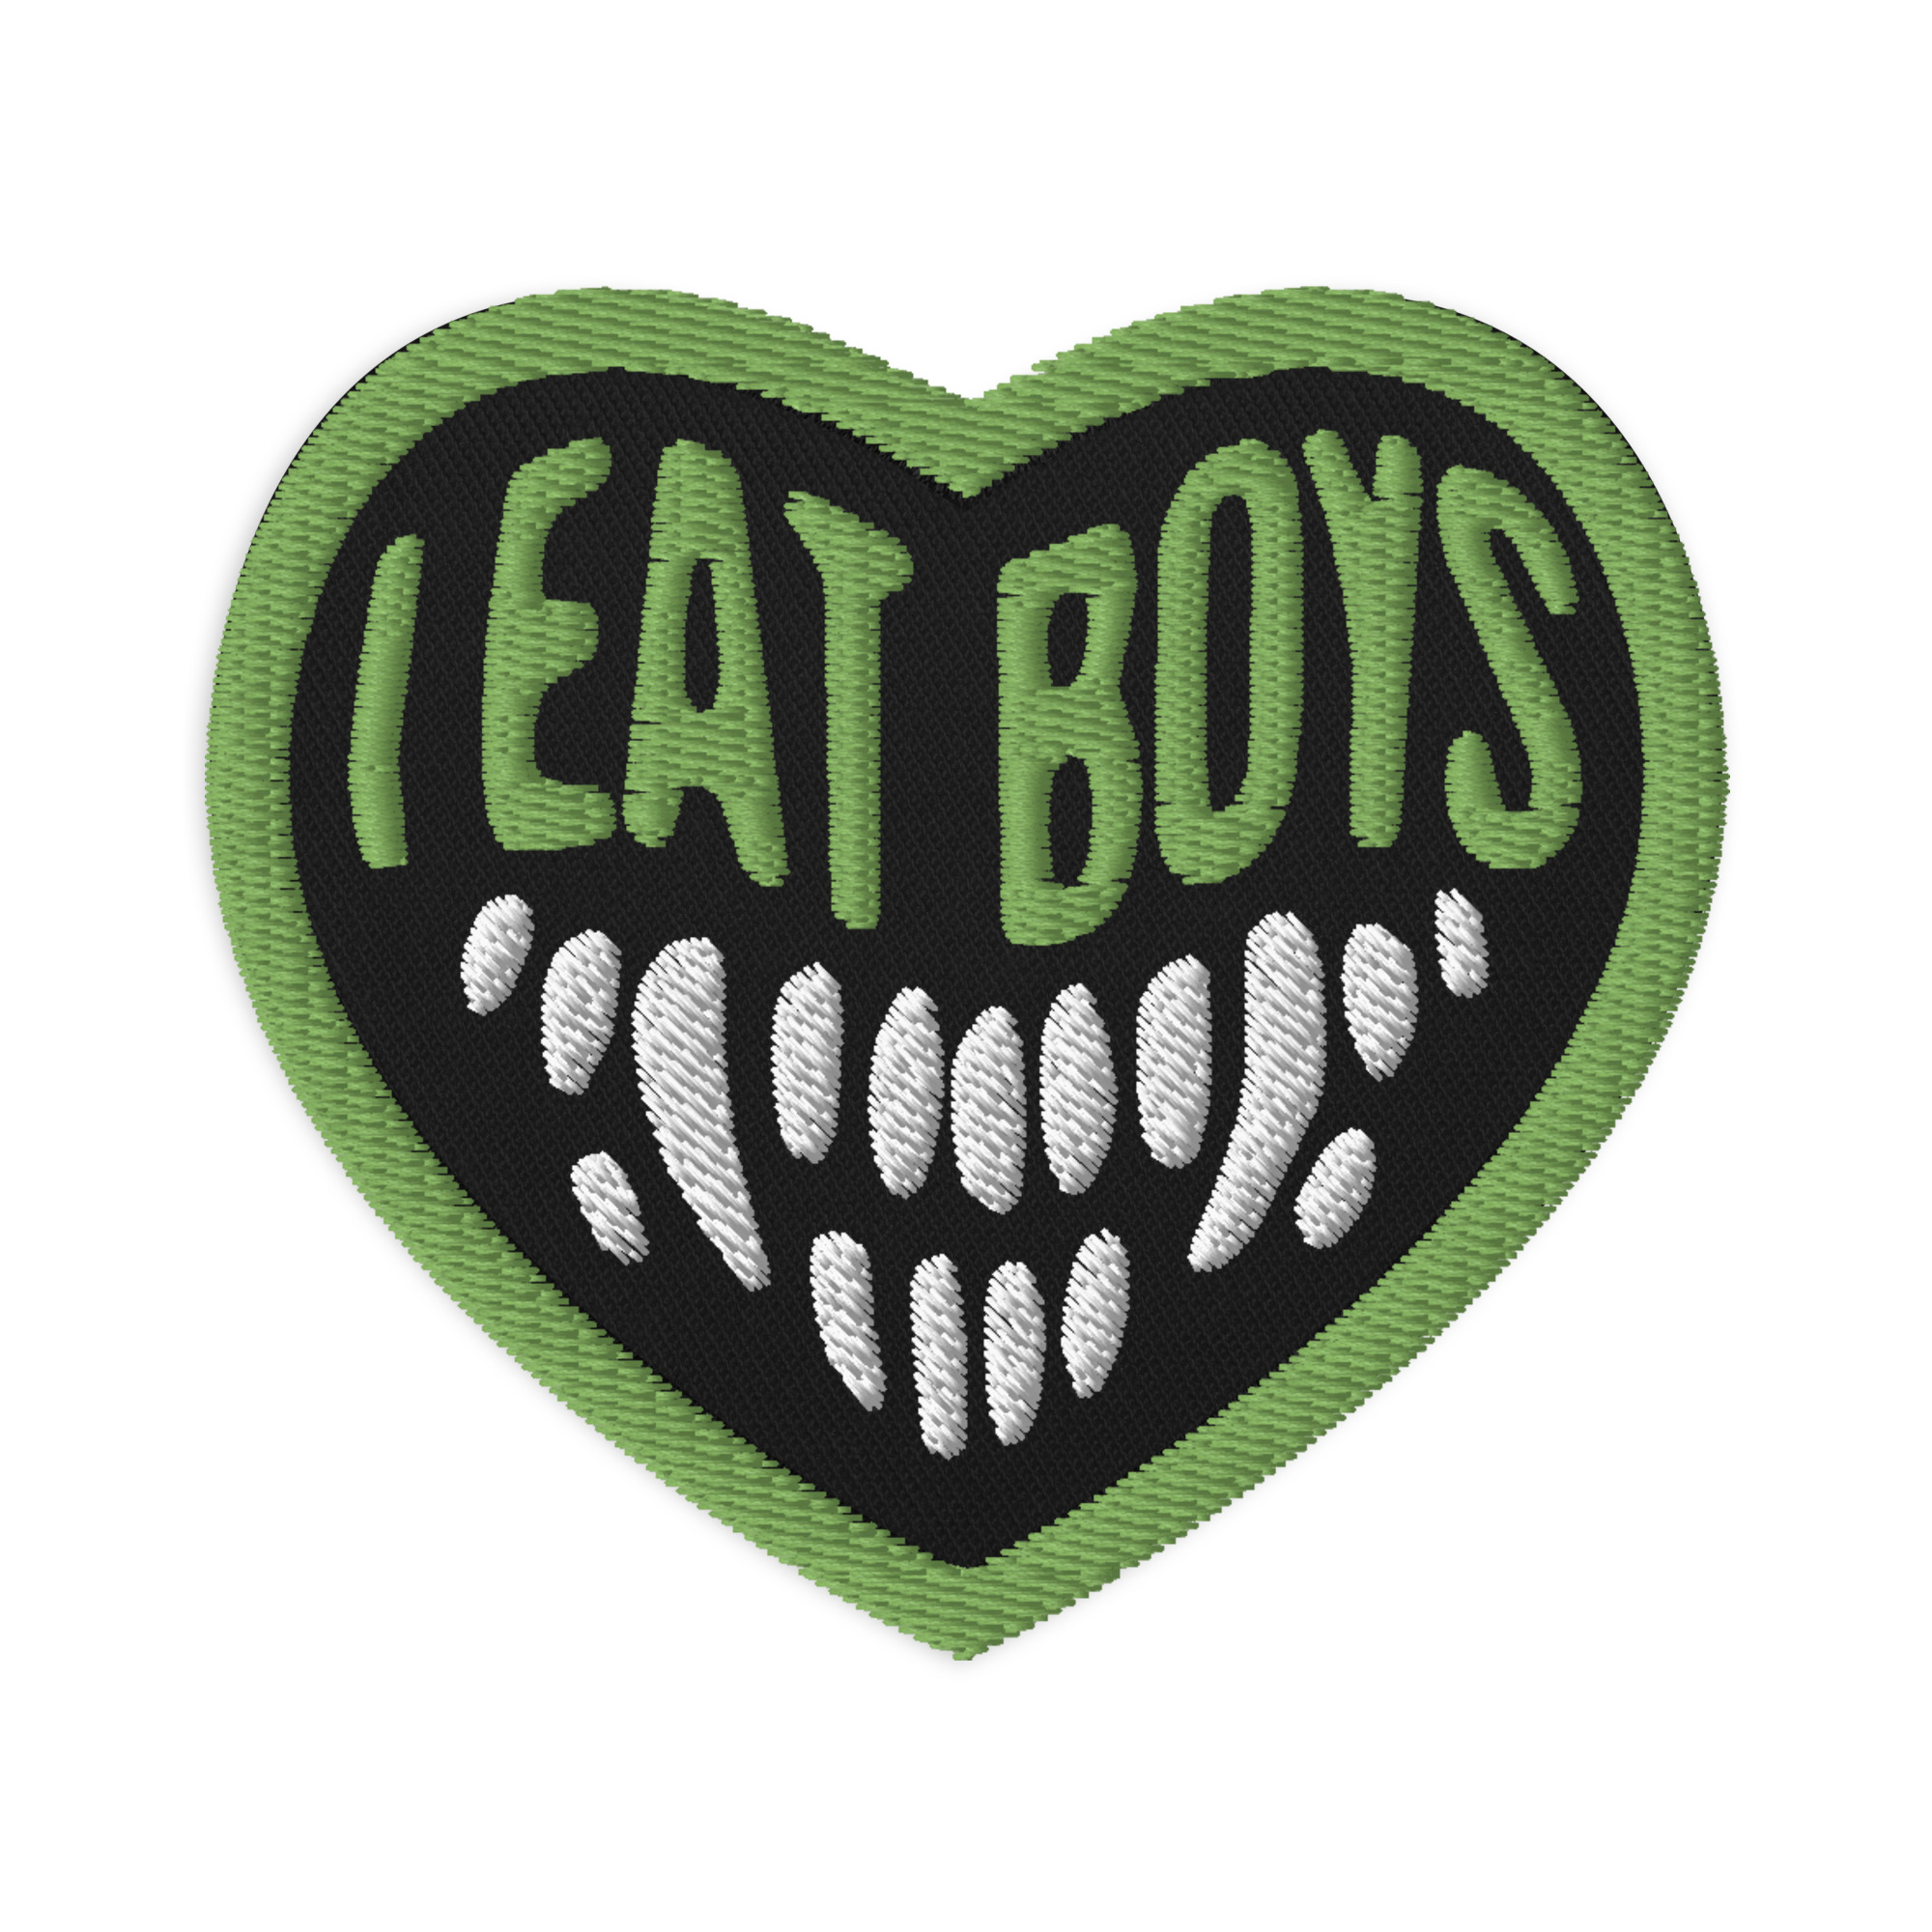 Featured image for “I Eat Boys - Embroidered patches”